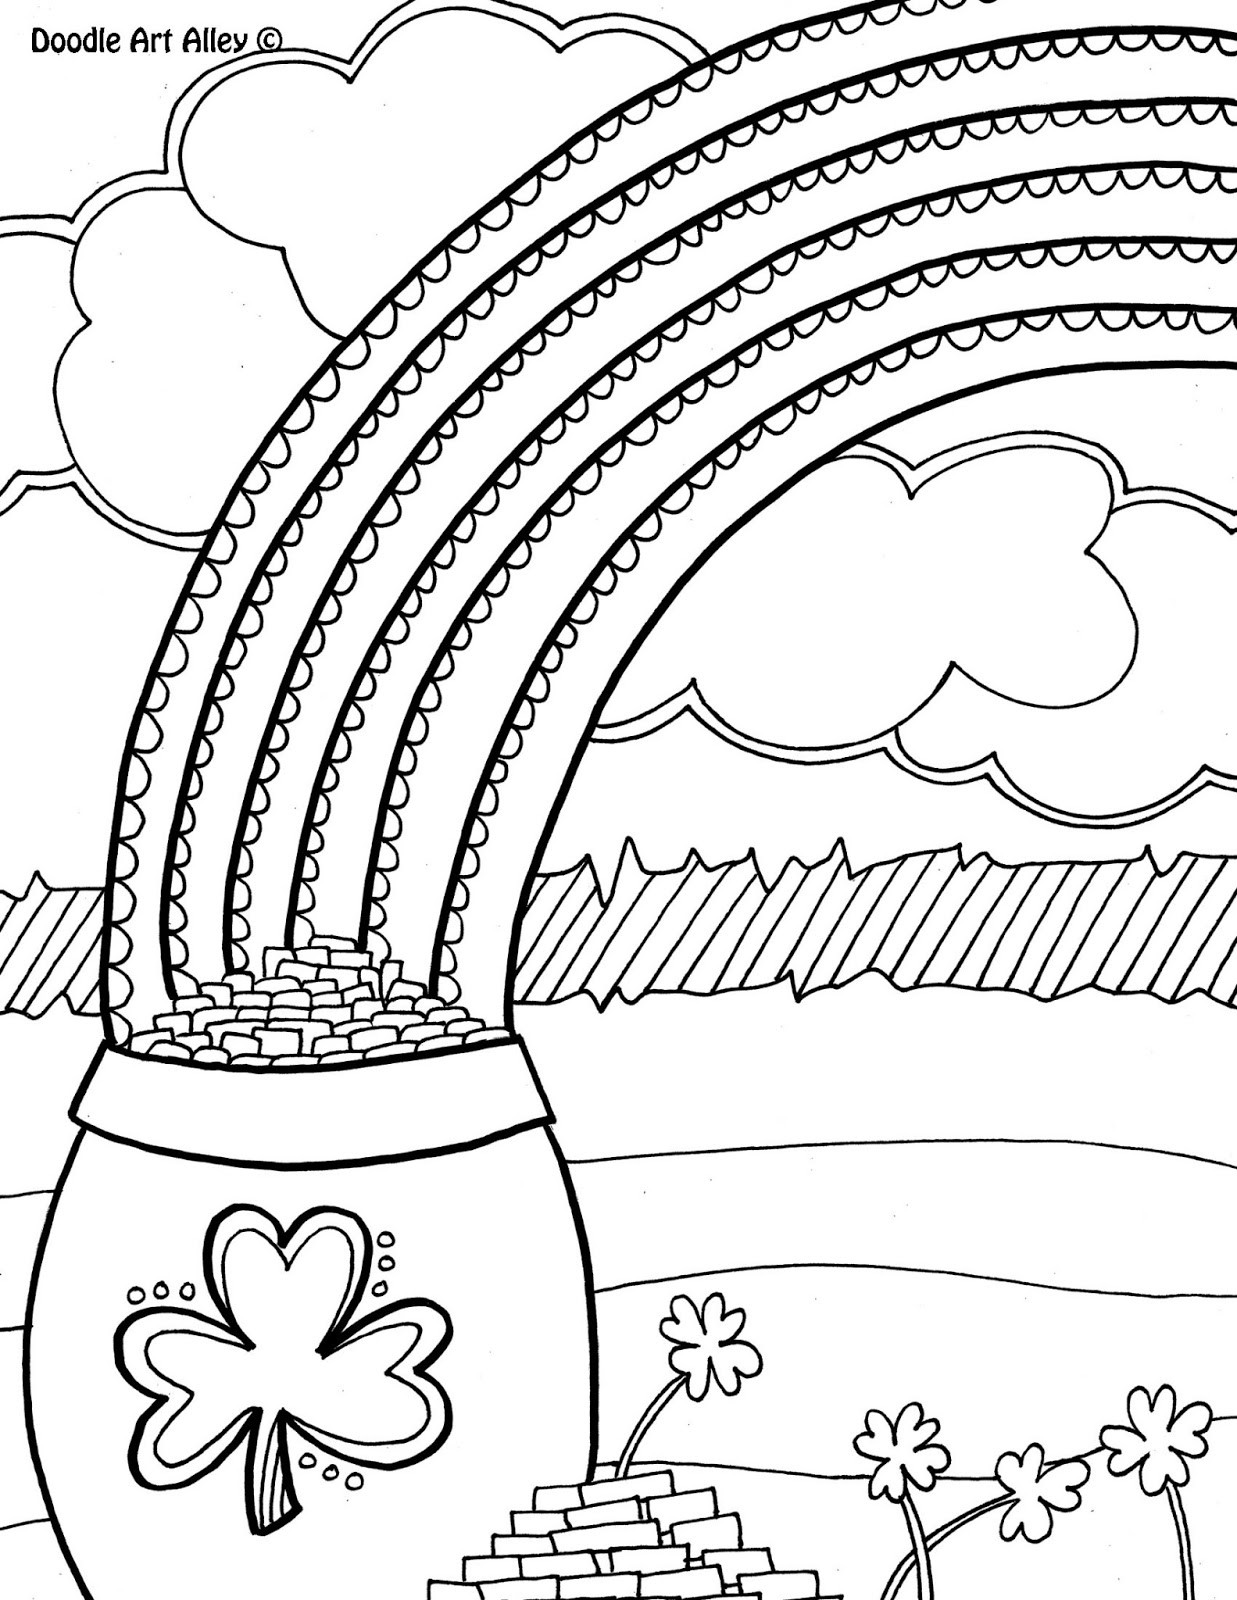 Rainbow Coloring Pages For Adults
 Teacher s Life Made Easy Free Awesome Coloring Pages